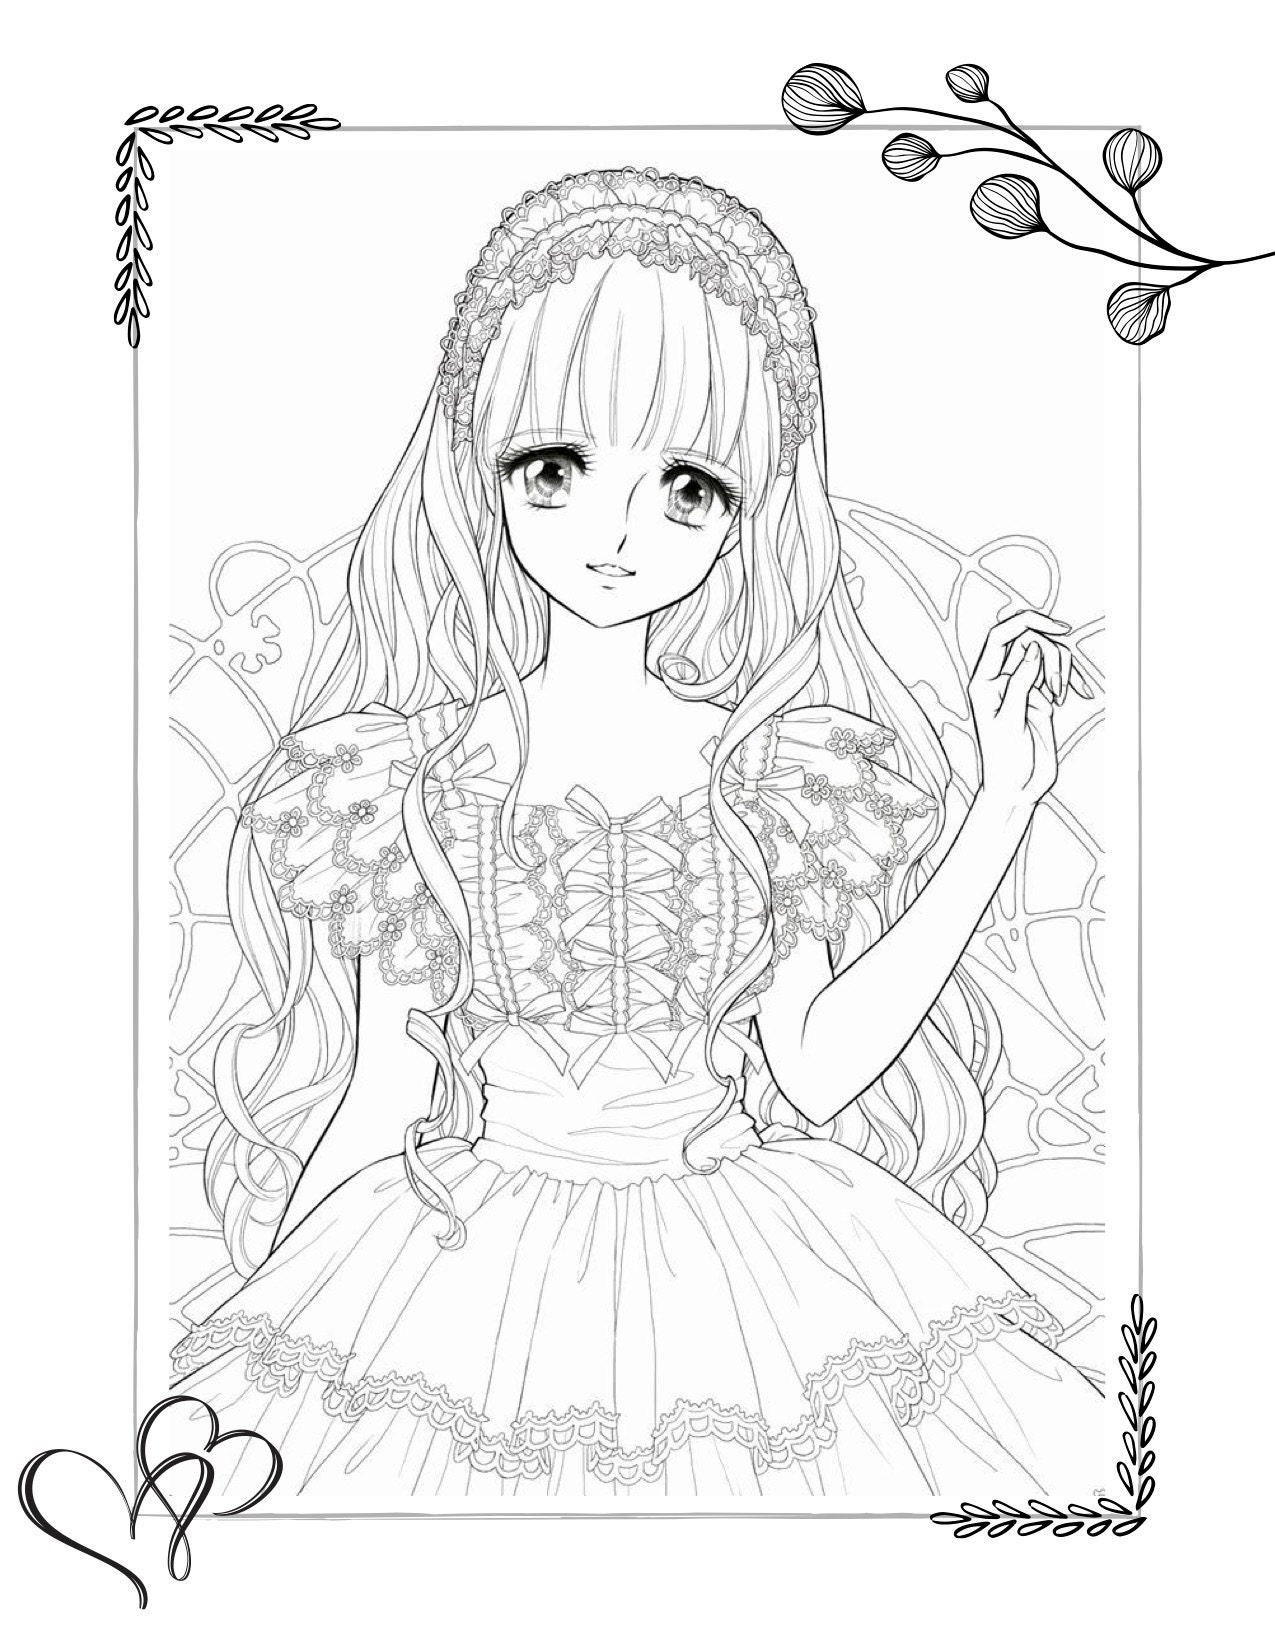 Digital Coloring Page   Aoki Bundle, 20 Printable Coloring Pages, PDF  Coloring Book, Anime, Japanese, Cute, Girl, Instant Download Ideas